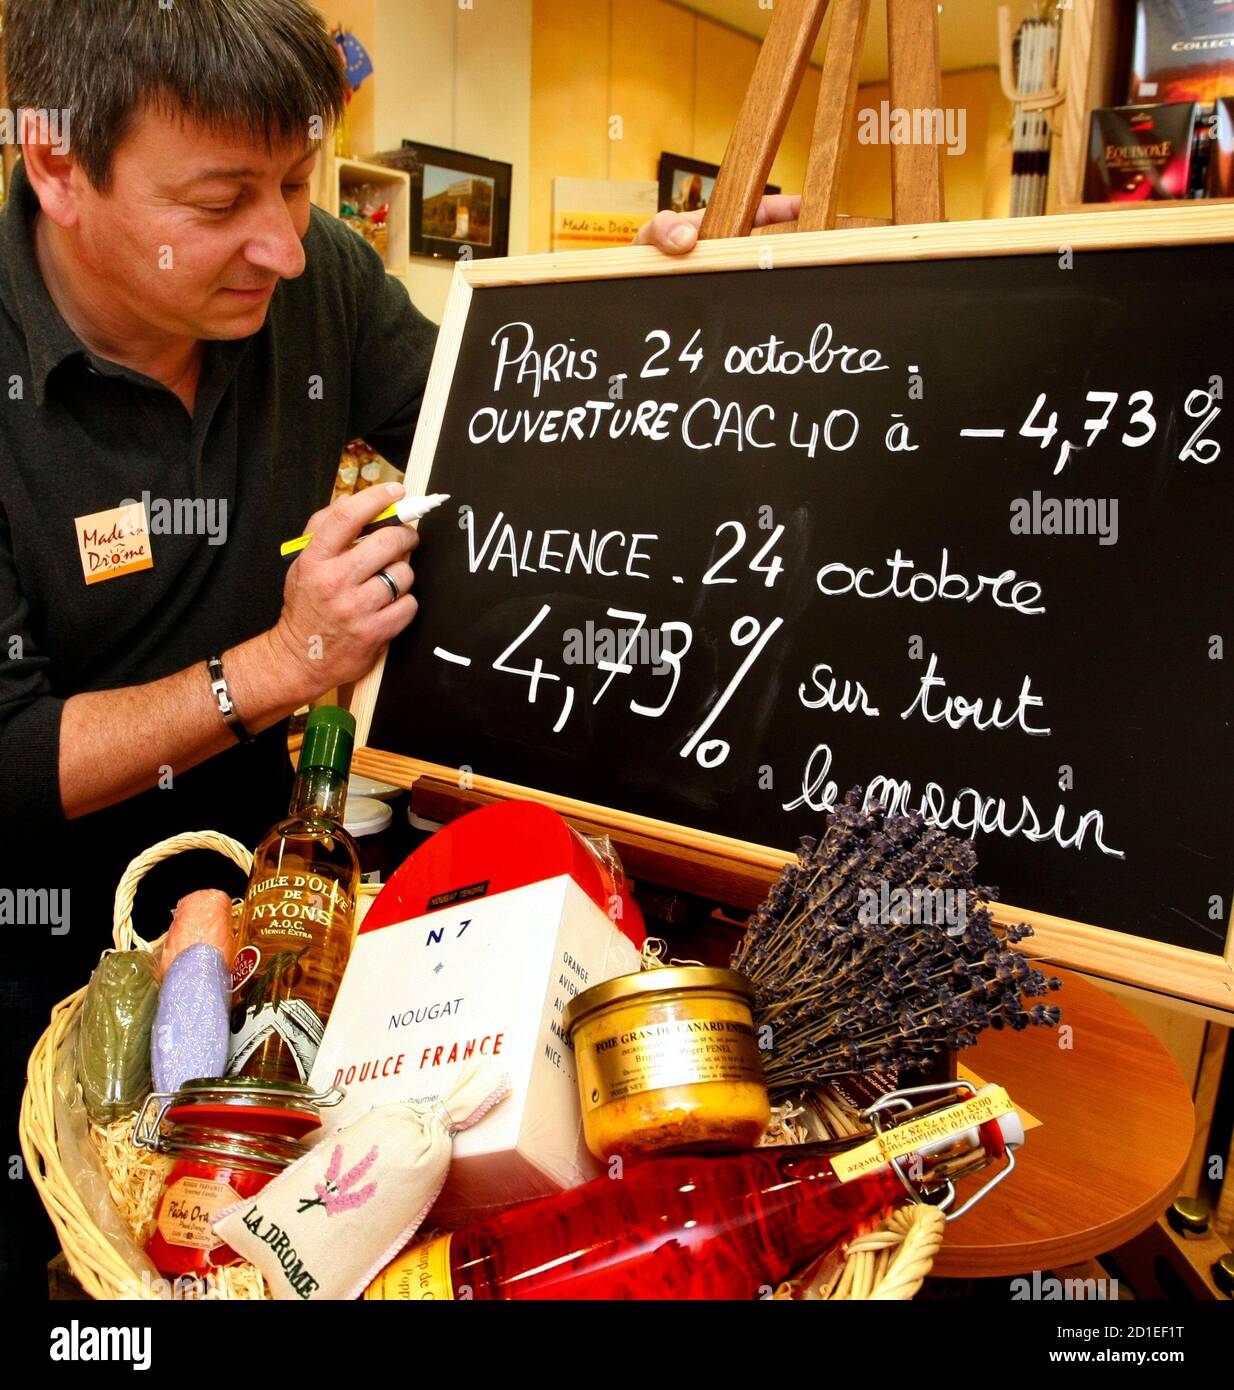 French shopkeeper Patrick Gardin, indicates the price reduction, less  4.73%, on a display board in his shop "Made in Drome" in Valence,  southeastern France, October 24, 2008. On days when the Paris